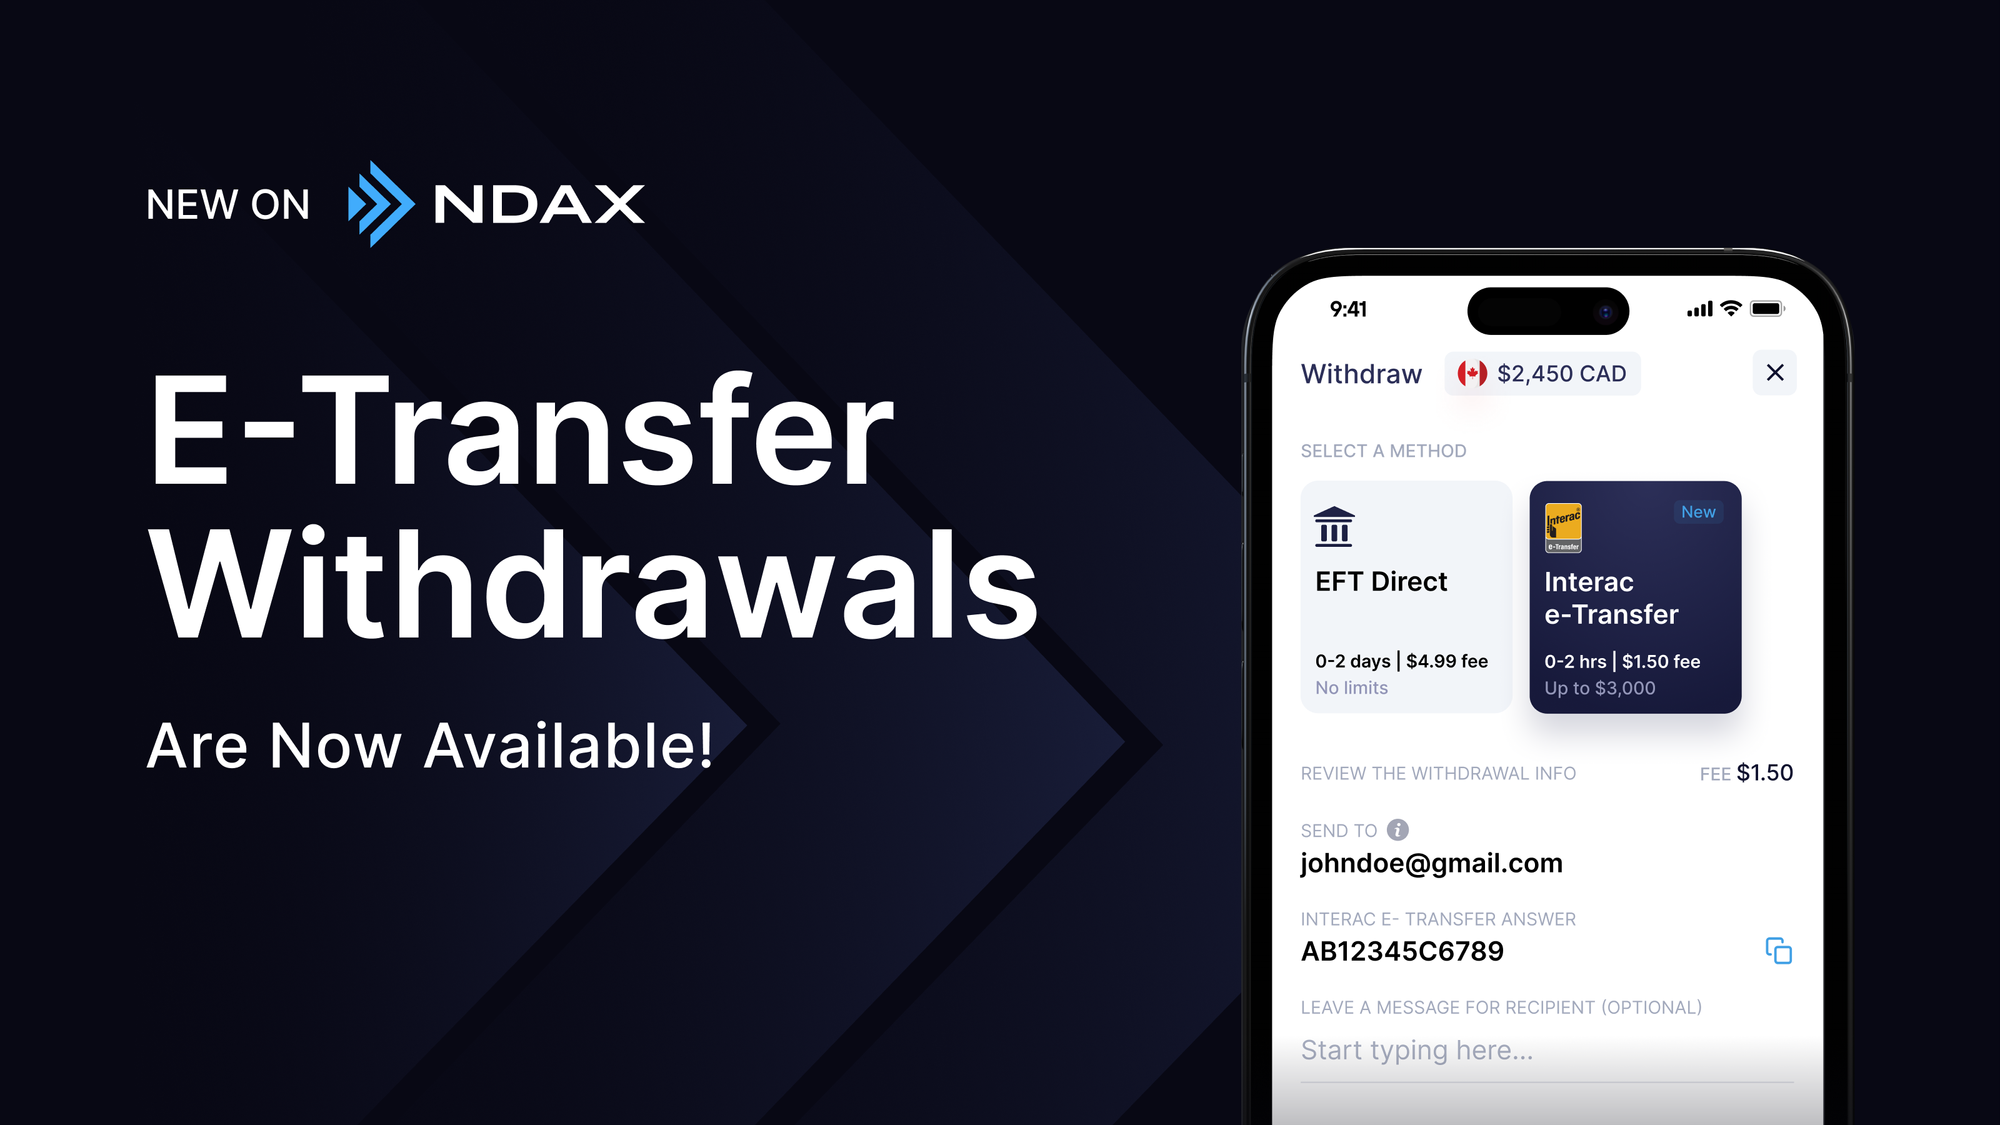 NDAX Launches Interac e-Transfer Withdrawals | Withdraw Your CAD for Less